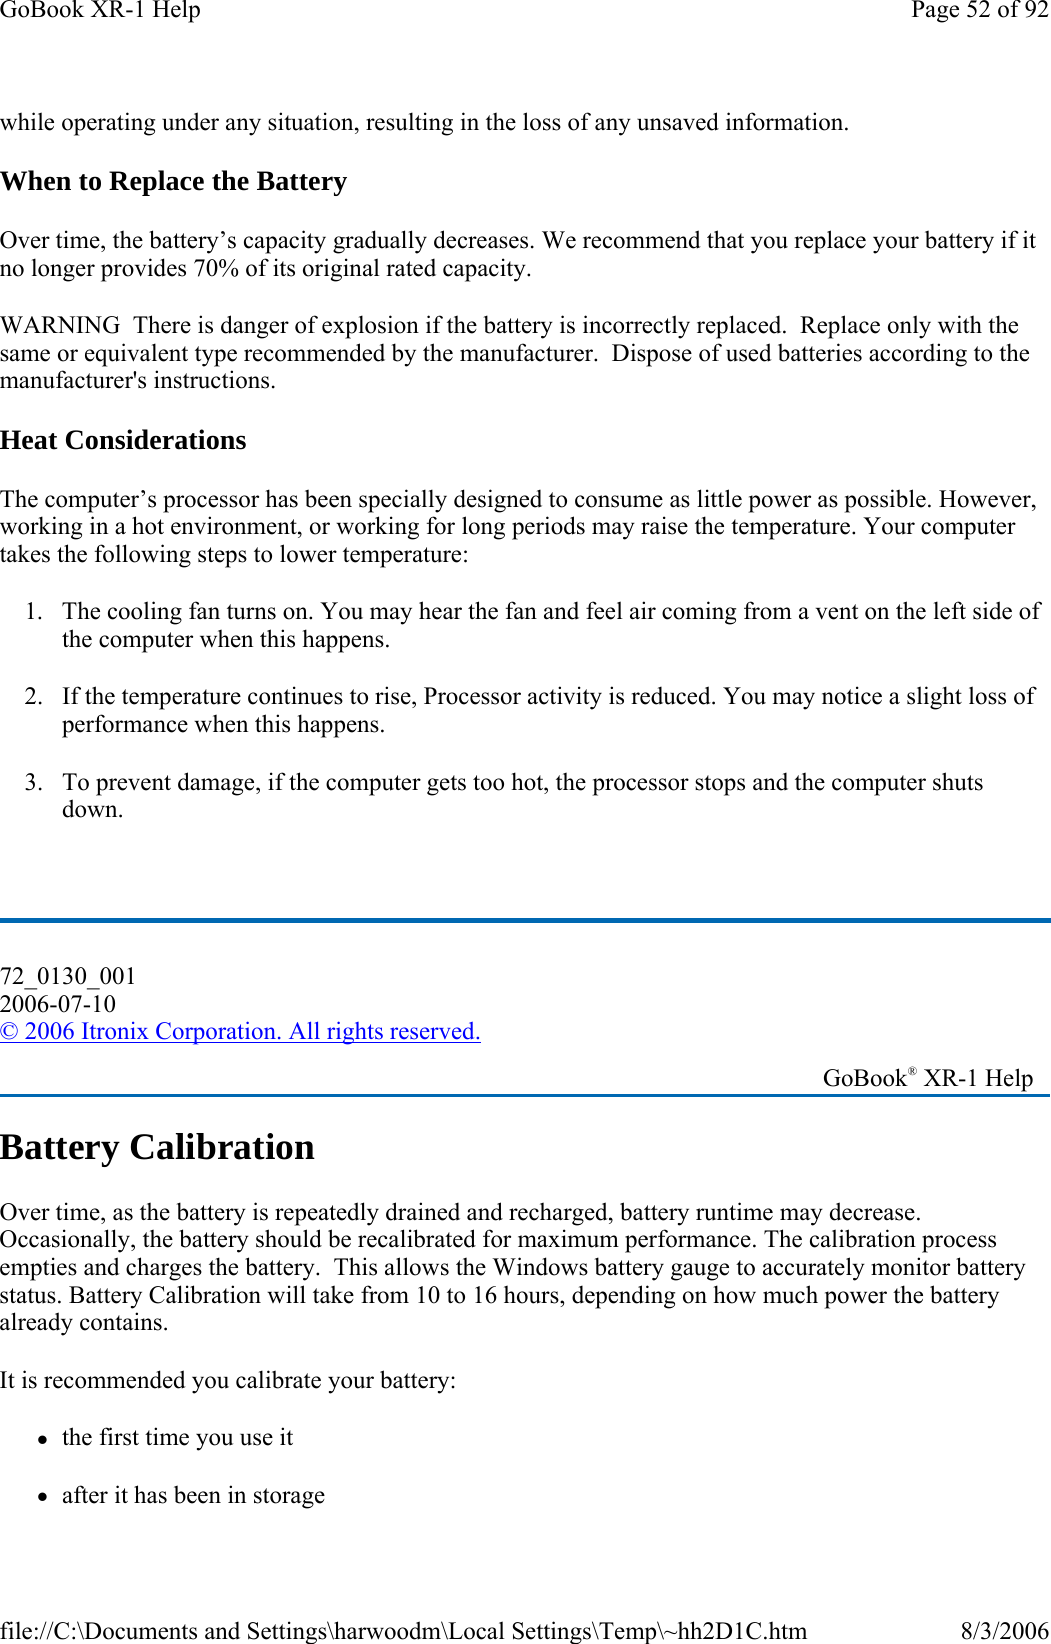 while operating under any situation, resulting in the loss of any unsaved information. When to Replace the Battery Over time, the battery’s capacity gradually decreases. We recommend that you replace your battery if it no longer provides 70% of its original rated capacity. WARNING  There is danger of explosion if the battery is incorrectly replaced.  Replace only with the same or equivalent type recommended by the manufacturer.  Dispose of used batteries according to the manufacturer&apos;s instructions. Heat Considerations The computer’s processor has been specially designed to consume as little power as possible. However, working in a hot environment, or working for long periods may raise the temperature. Your computer takes the following steps to lower temperature: 1. The cooling fan turns on. You may hear the fan and feel air coming from a vent on the left side of the computer when this happens.  2. If the temperature continues to rise, Processor activity is reduced. You may notice a slight loss of performance when this happens. 3. To prevent damage, if the computer gets too hot, the processor stops and the computer shuts down.  Battery Calibration Over time, as the battery is repeatedly drained and recharged, battery runtime may decrease. Occasionally, the battery should be recalibrated for maximum performance. The calibration process empties and charges the battery.  This allows the Windows battery gauge to accurately monitor battery status. Battery Calibration will take from 10 to 16 hours, depending on how much power the battery already contains. It is recommended you calibrate your battery: zthe first time you use it zafter it has been in storage 72_0130_001 2006-07-10 © 2006 Itronix Corporation. All rights reserved.   GoBook® XR-1 Help Page 52 of 92GoBook XR-1 Help8/3/2006file://C:\Documents and Settings\harwoodm\Local Settings\Temp\~hh2D1C.htm